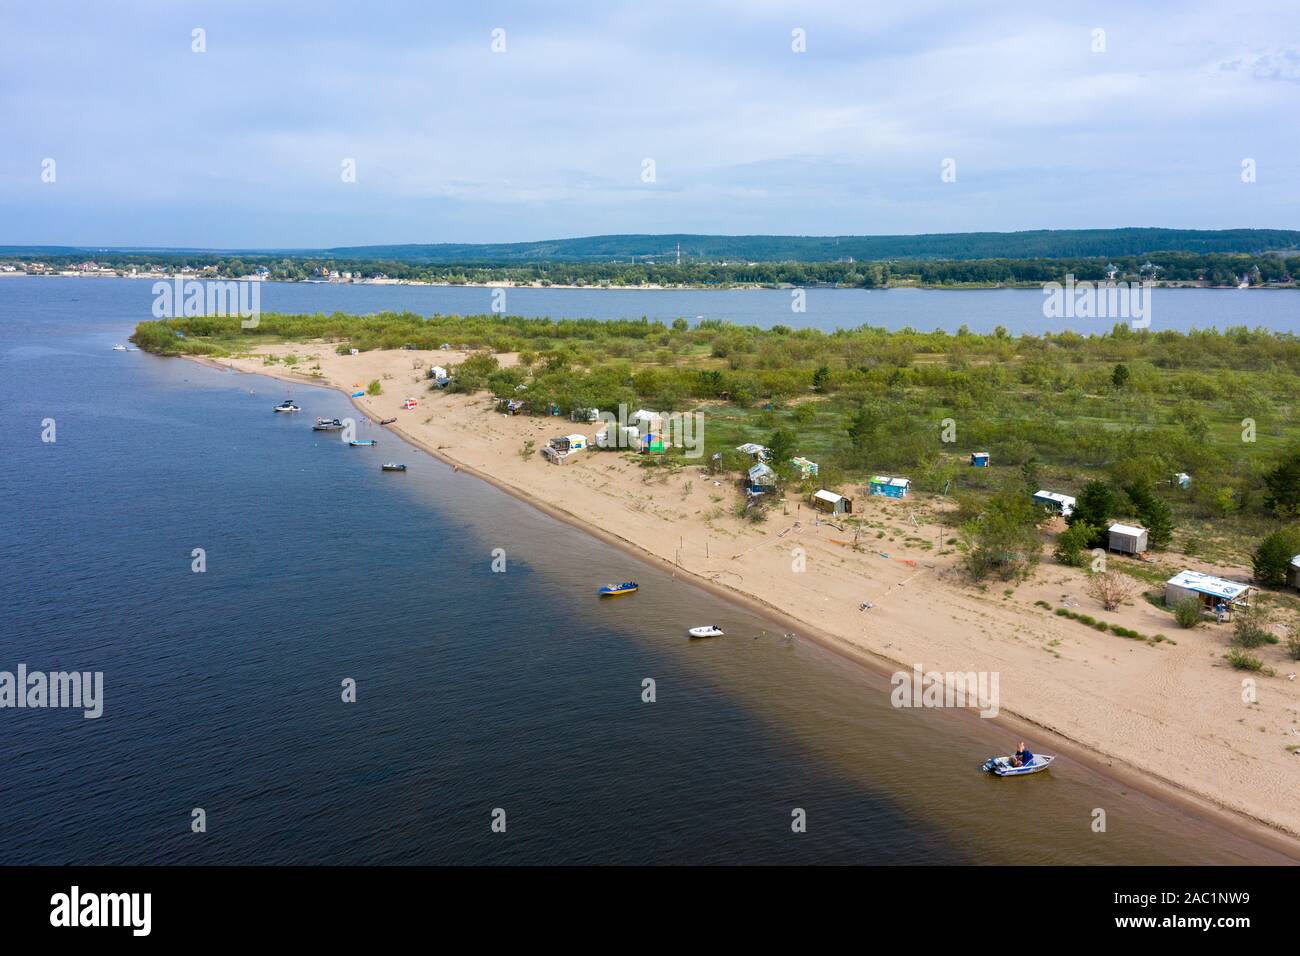 an island on the Volga near Samara. the island is a tent city of tourists and fishermen. People relax in the summer in nature Stock Photo